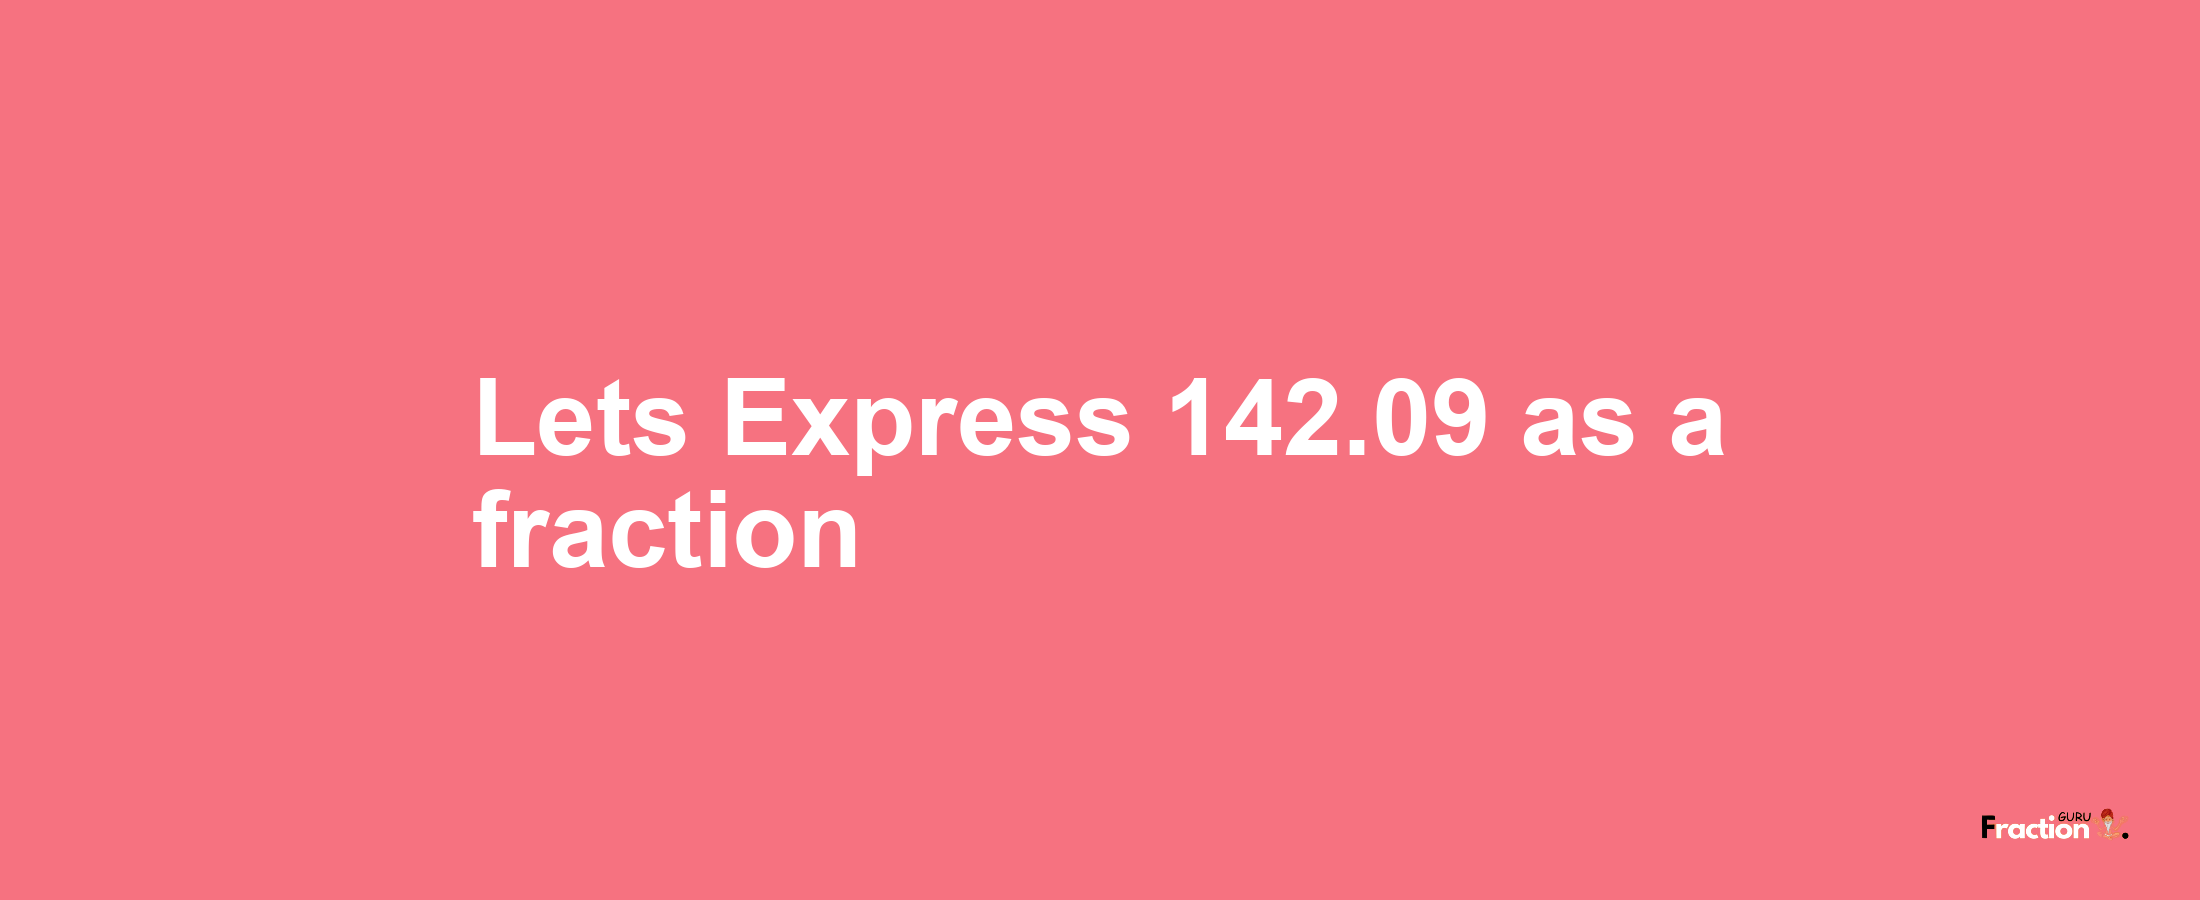 Lets Express 142.09 as afraction